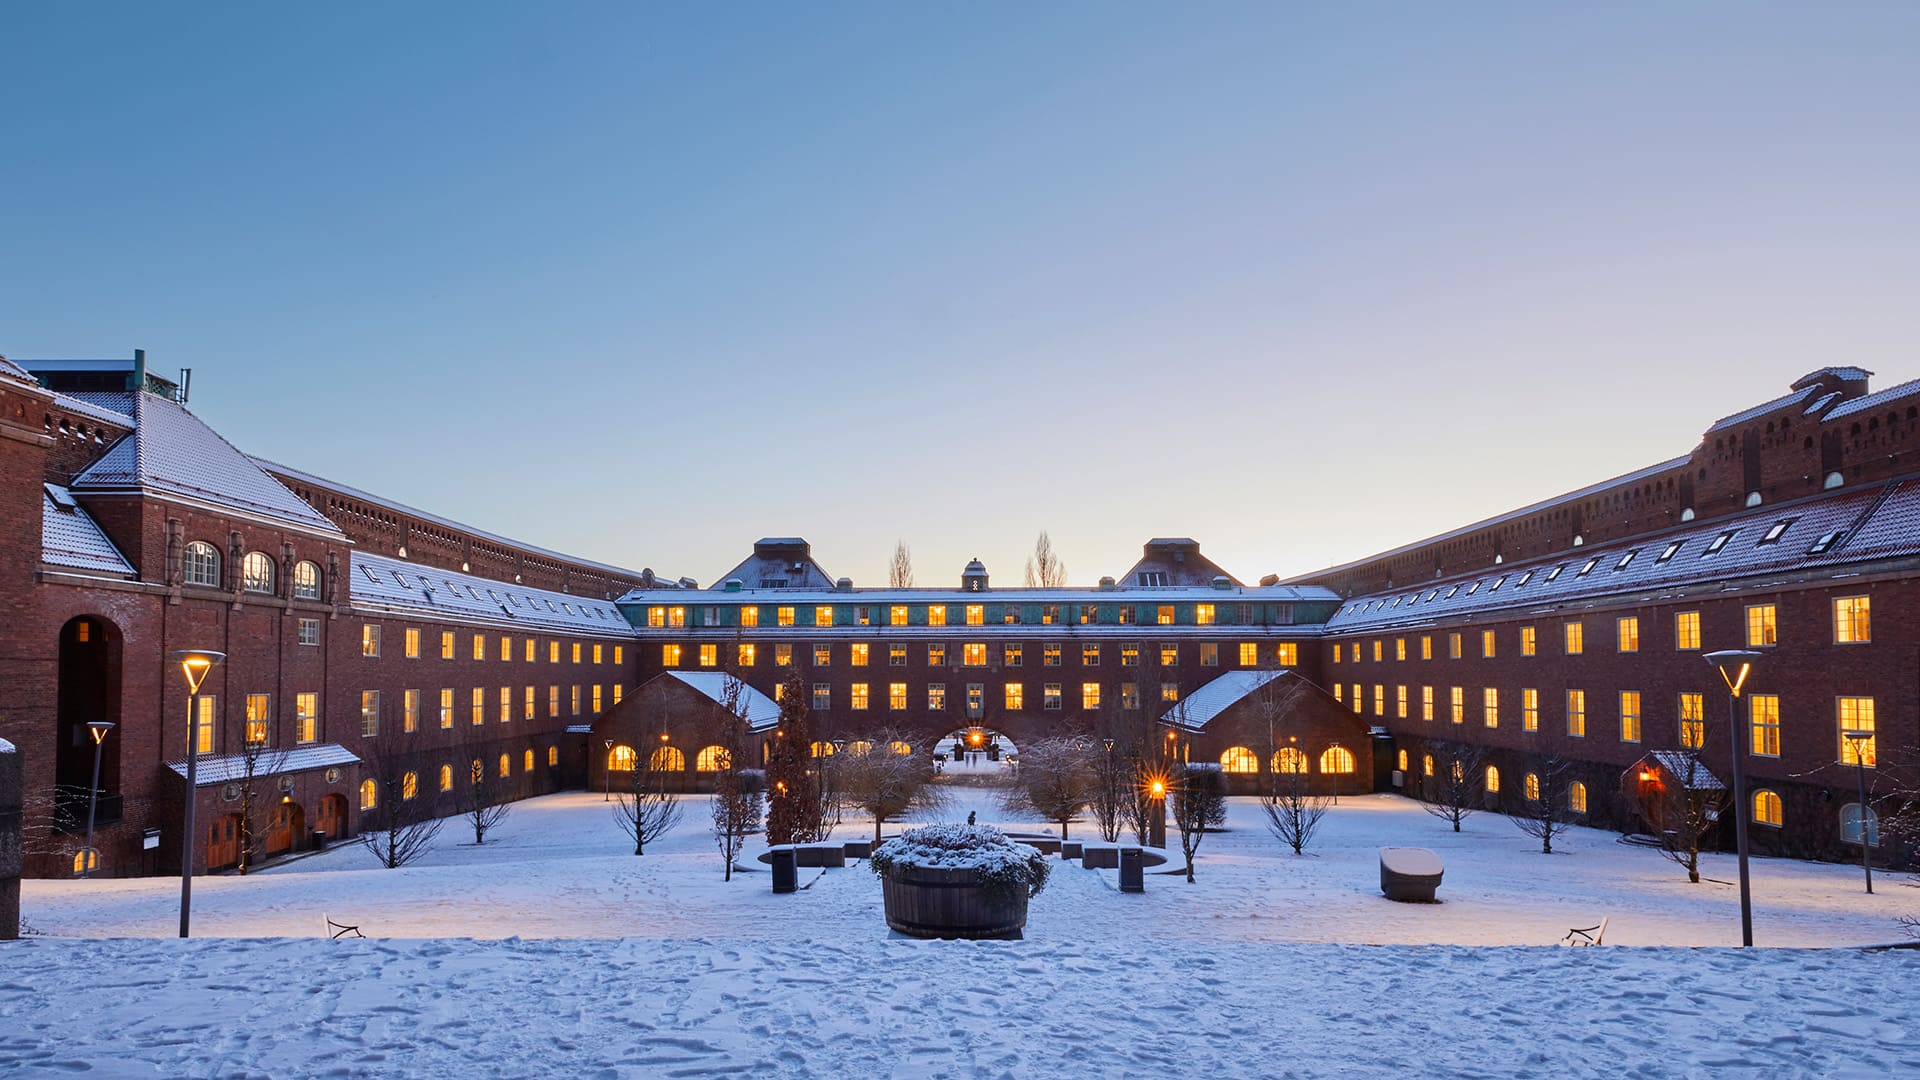 Postdoc in Machine Learning (Nuclear Physics Division), KTH, Stockholm, Sweden